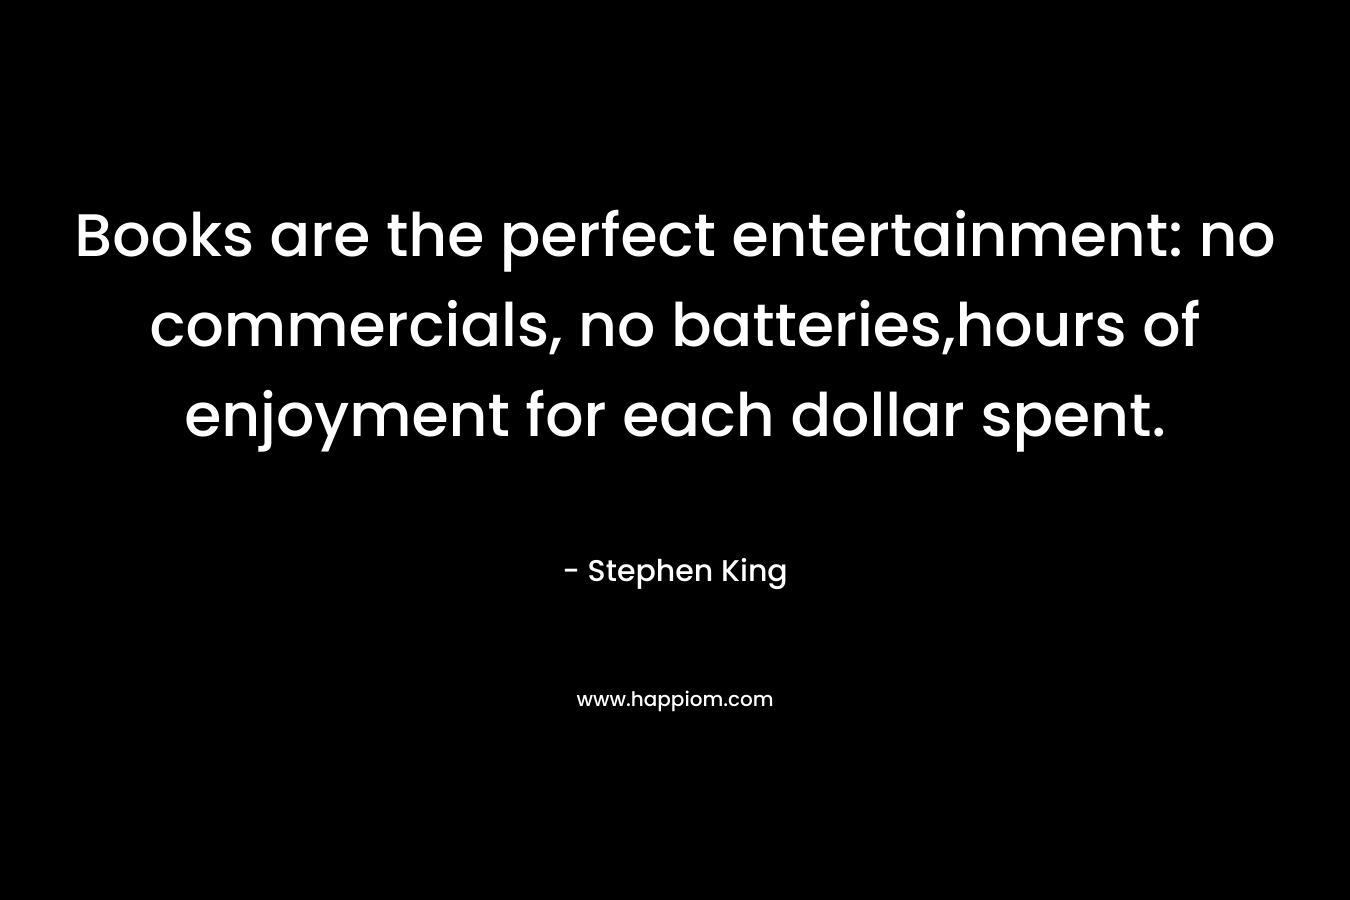 Books are the perfect entertainment: no commercials, no batteries,hours of enjoyment for each dollar spent. – Stephen King